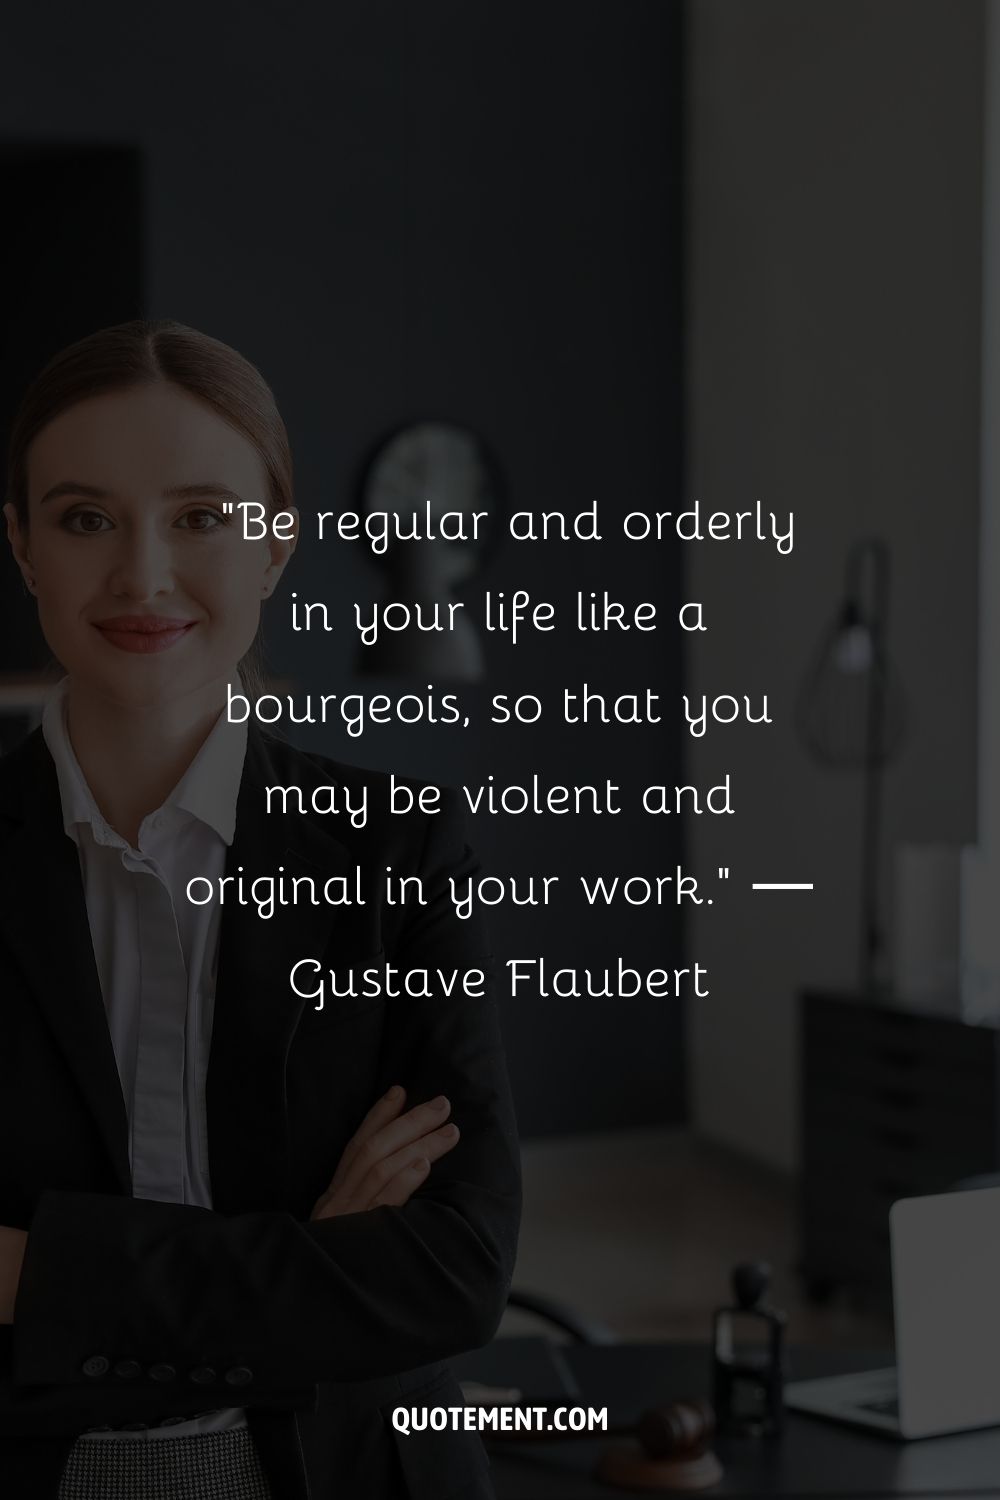 “Be regular and orderly in your life like a bourgeois, so that you may be violent and original in your work.” ― Gustave Flaubert